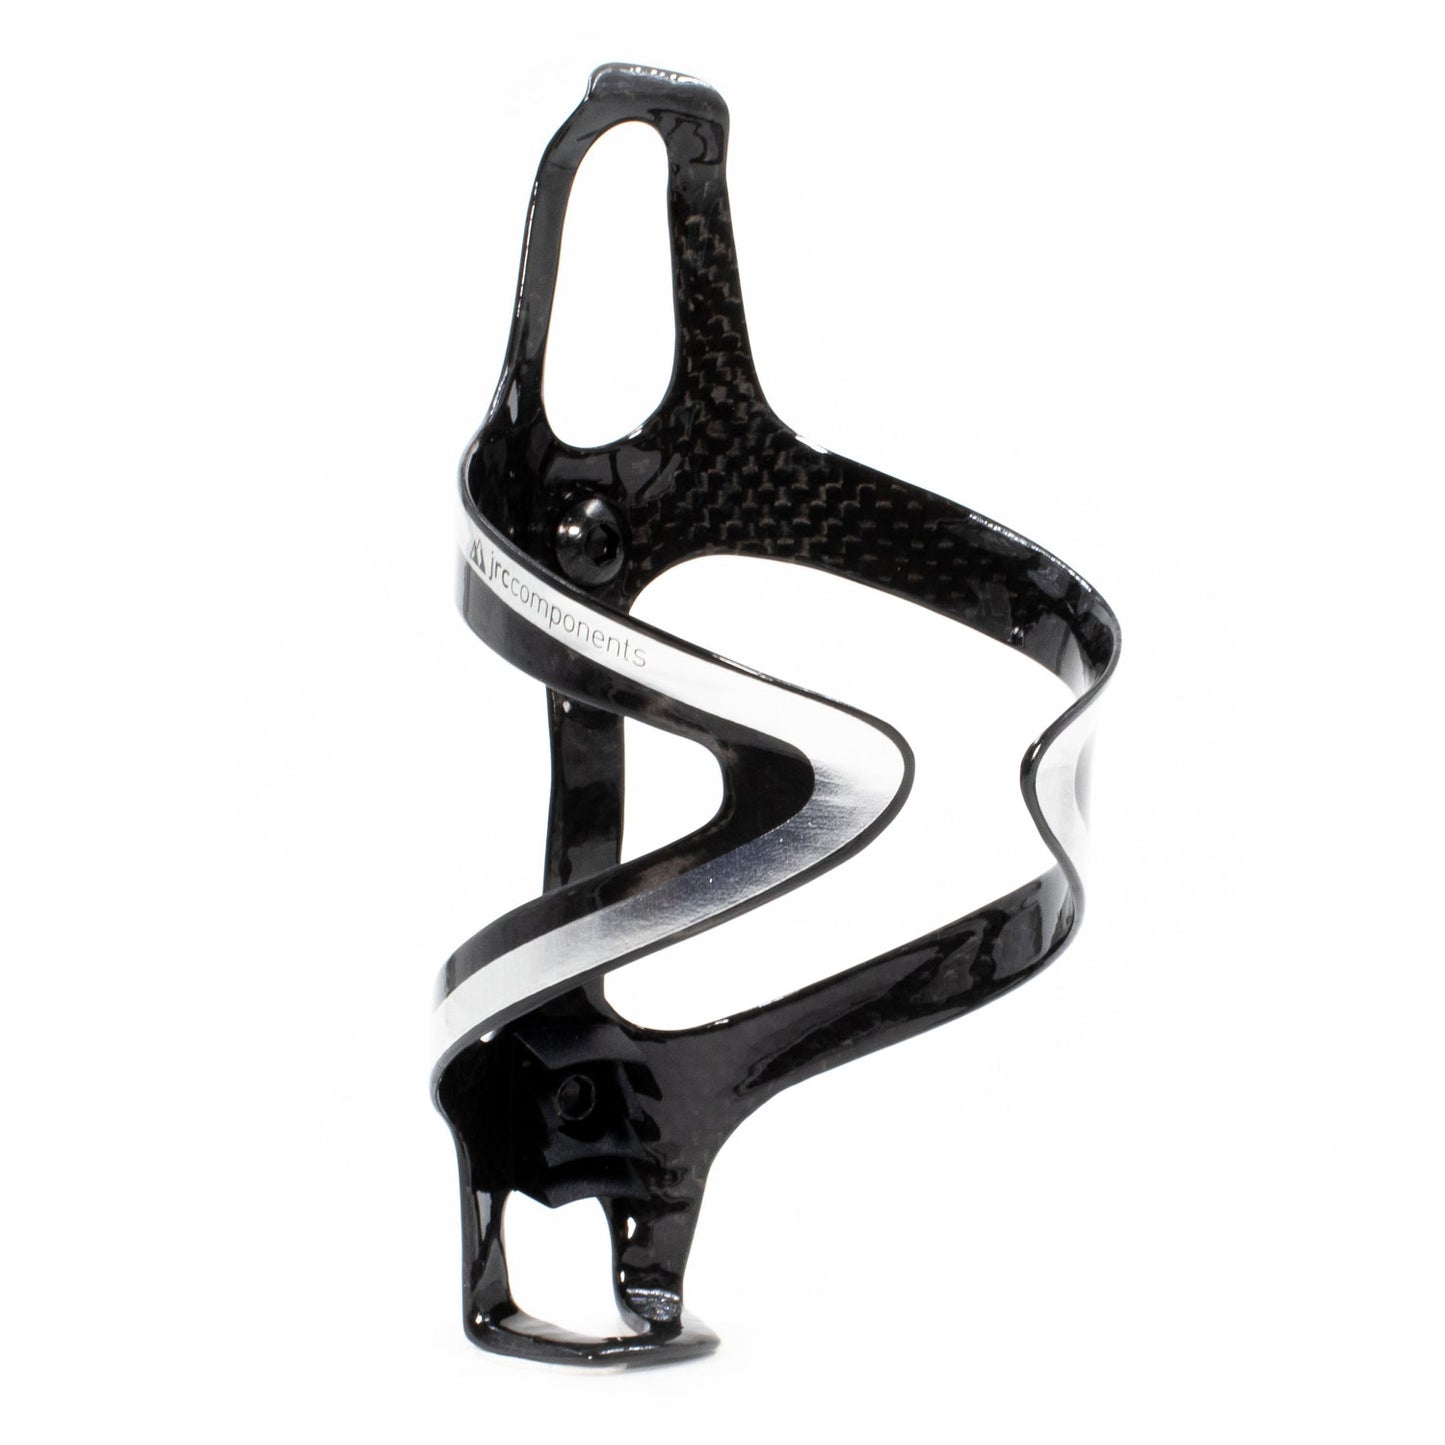 Silver, super lightweight carbon fibre bottle cages with a sleek gloss finish